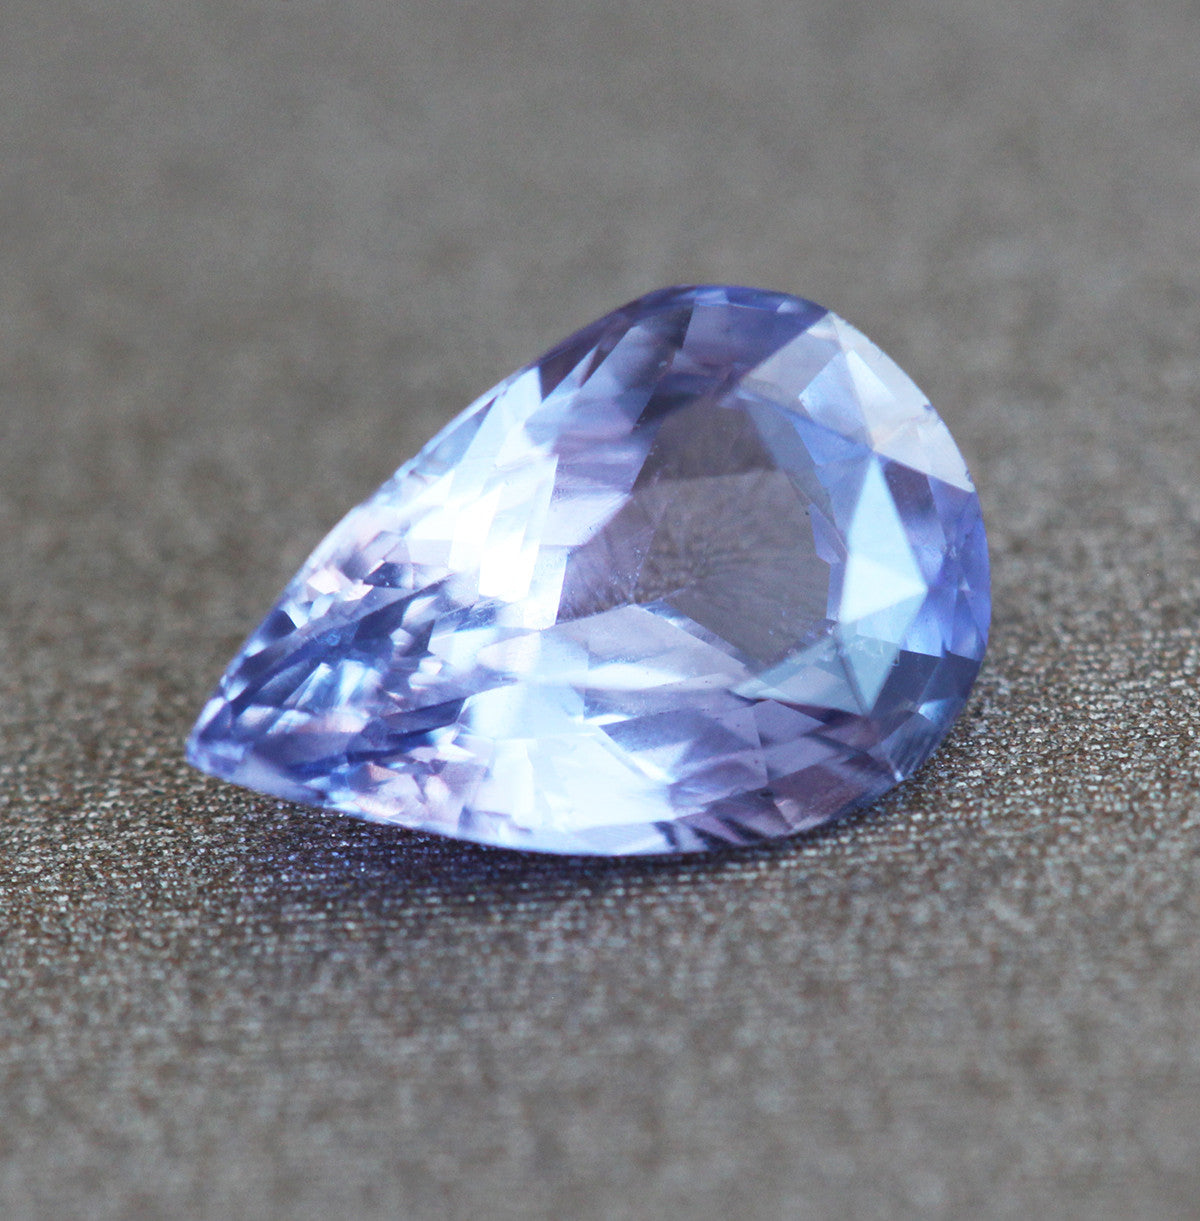 Loose pear-shaped violet sapphire